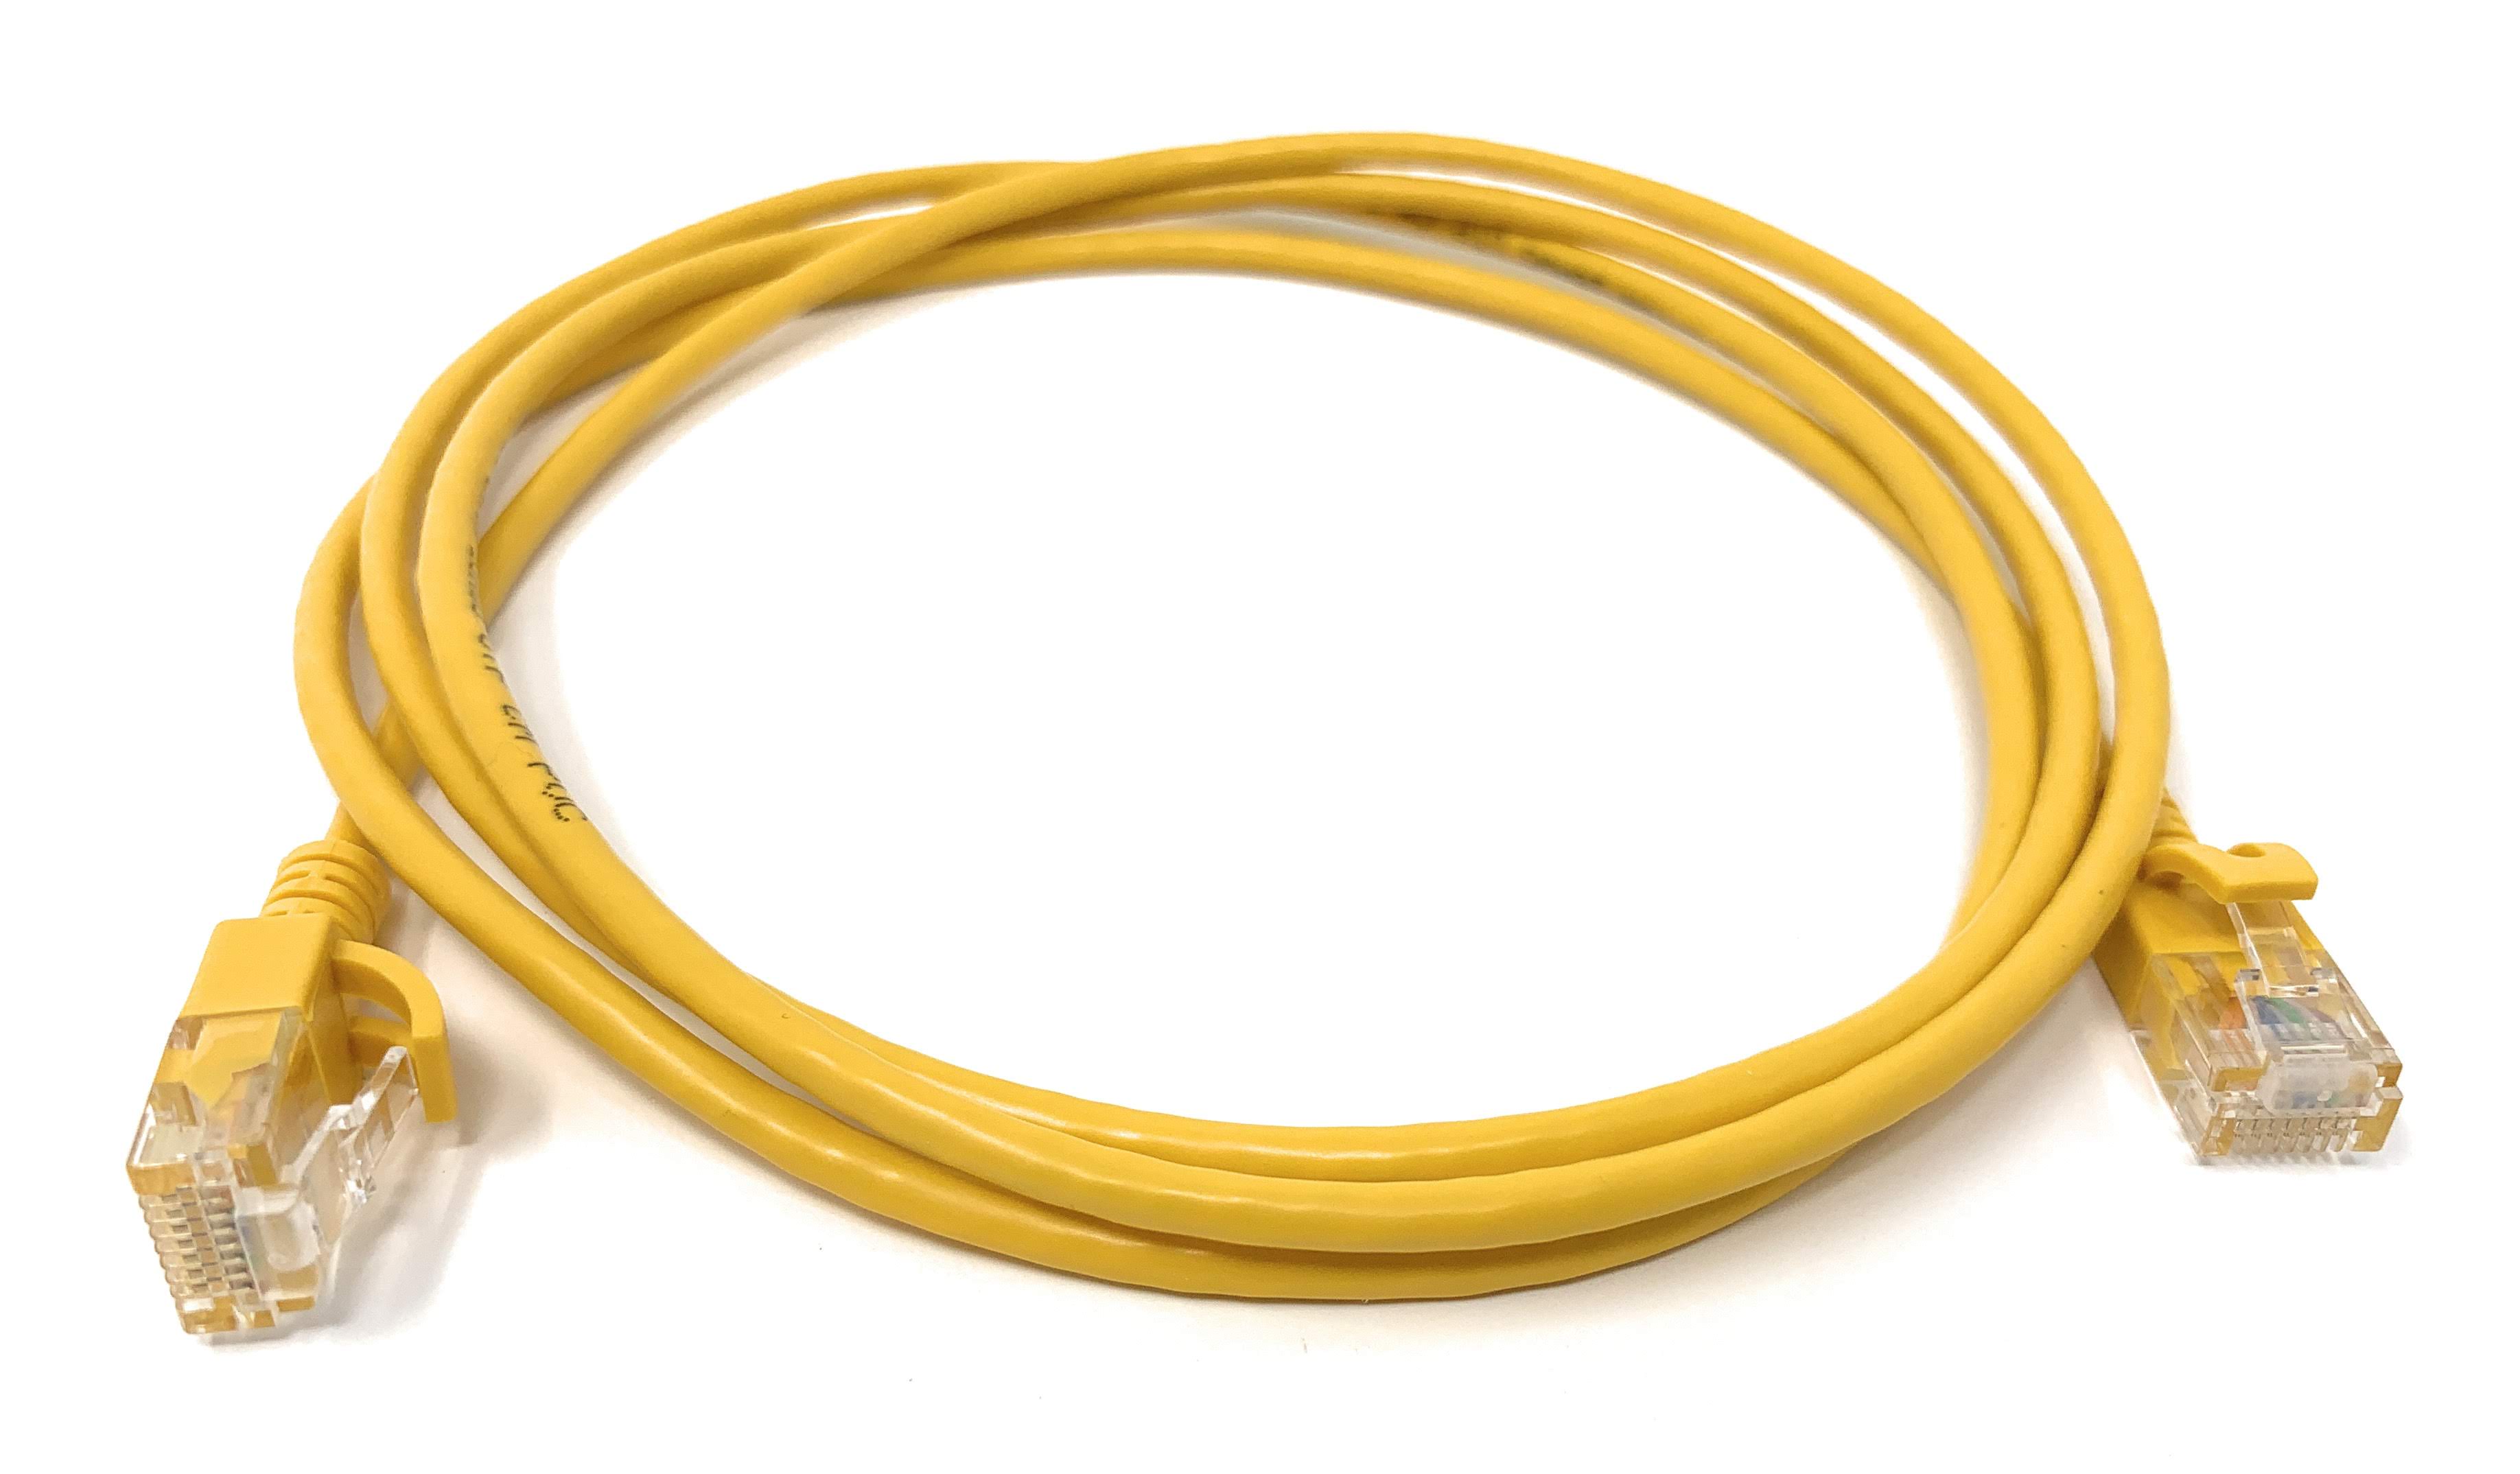 Category 6a 28awg Patch Cables with Slim Jacket- 15 Feet